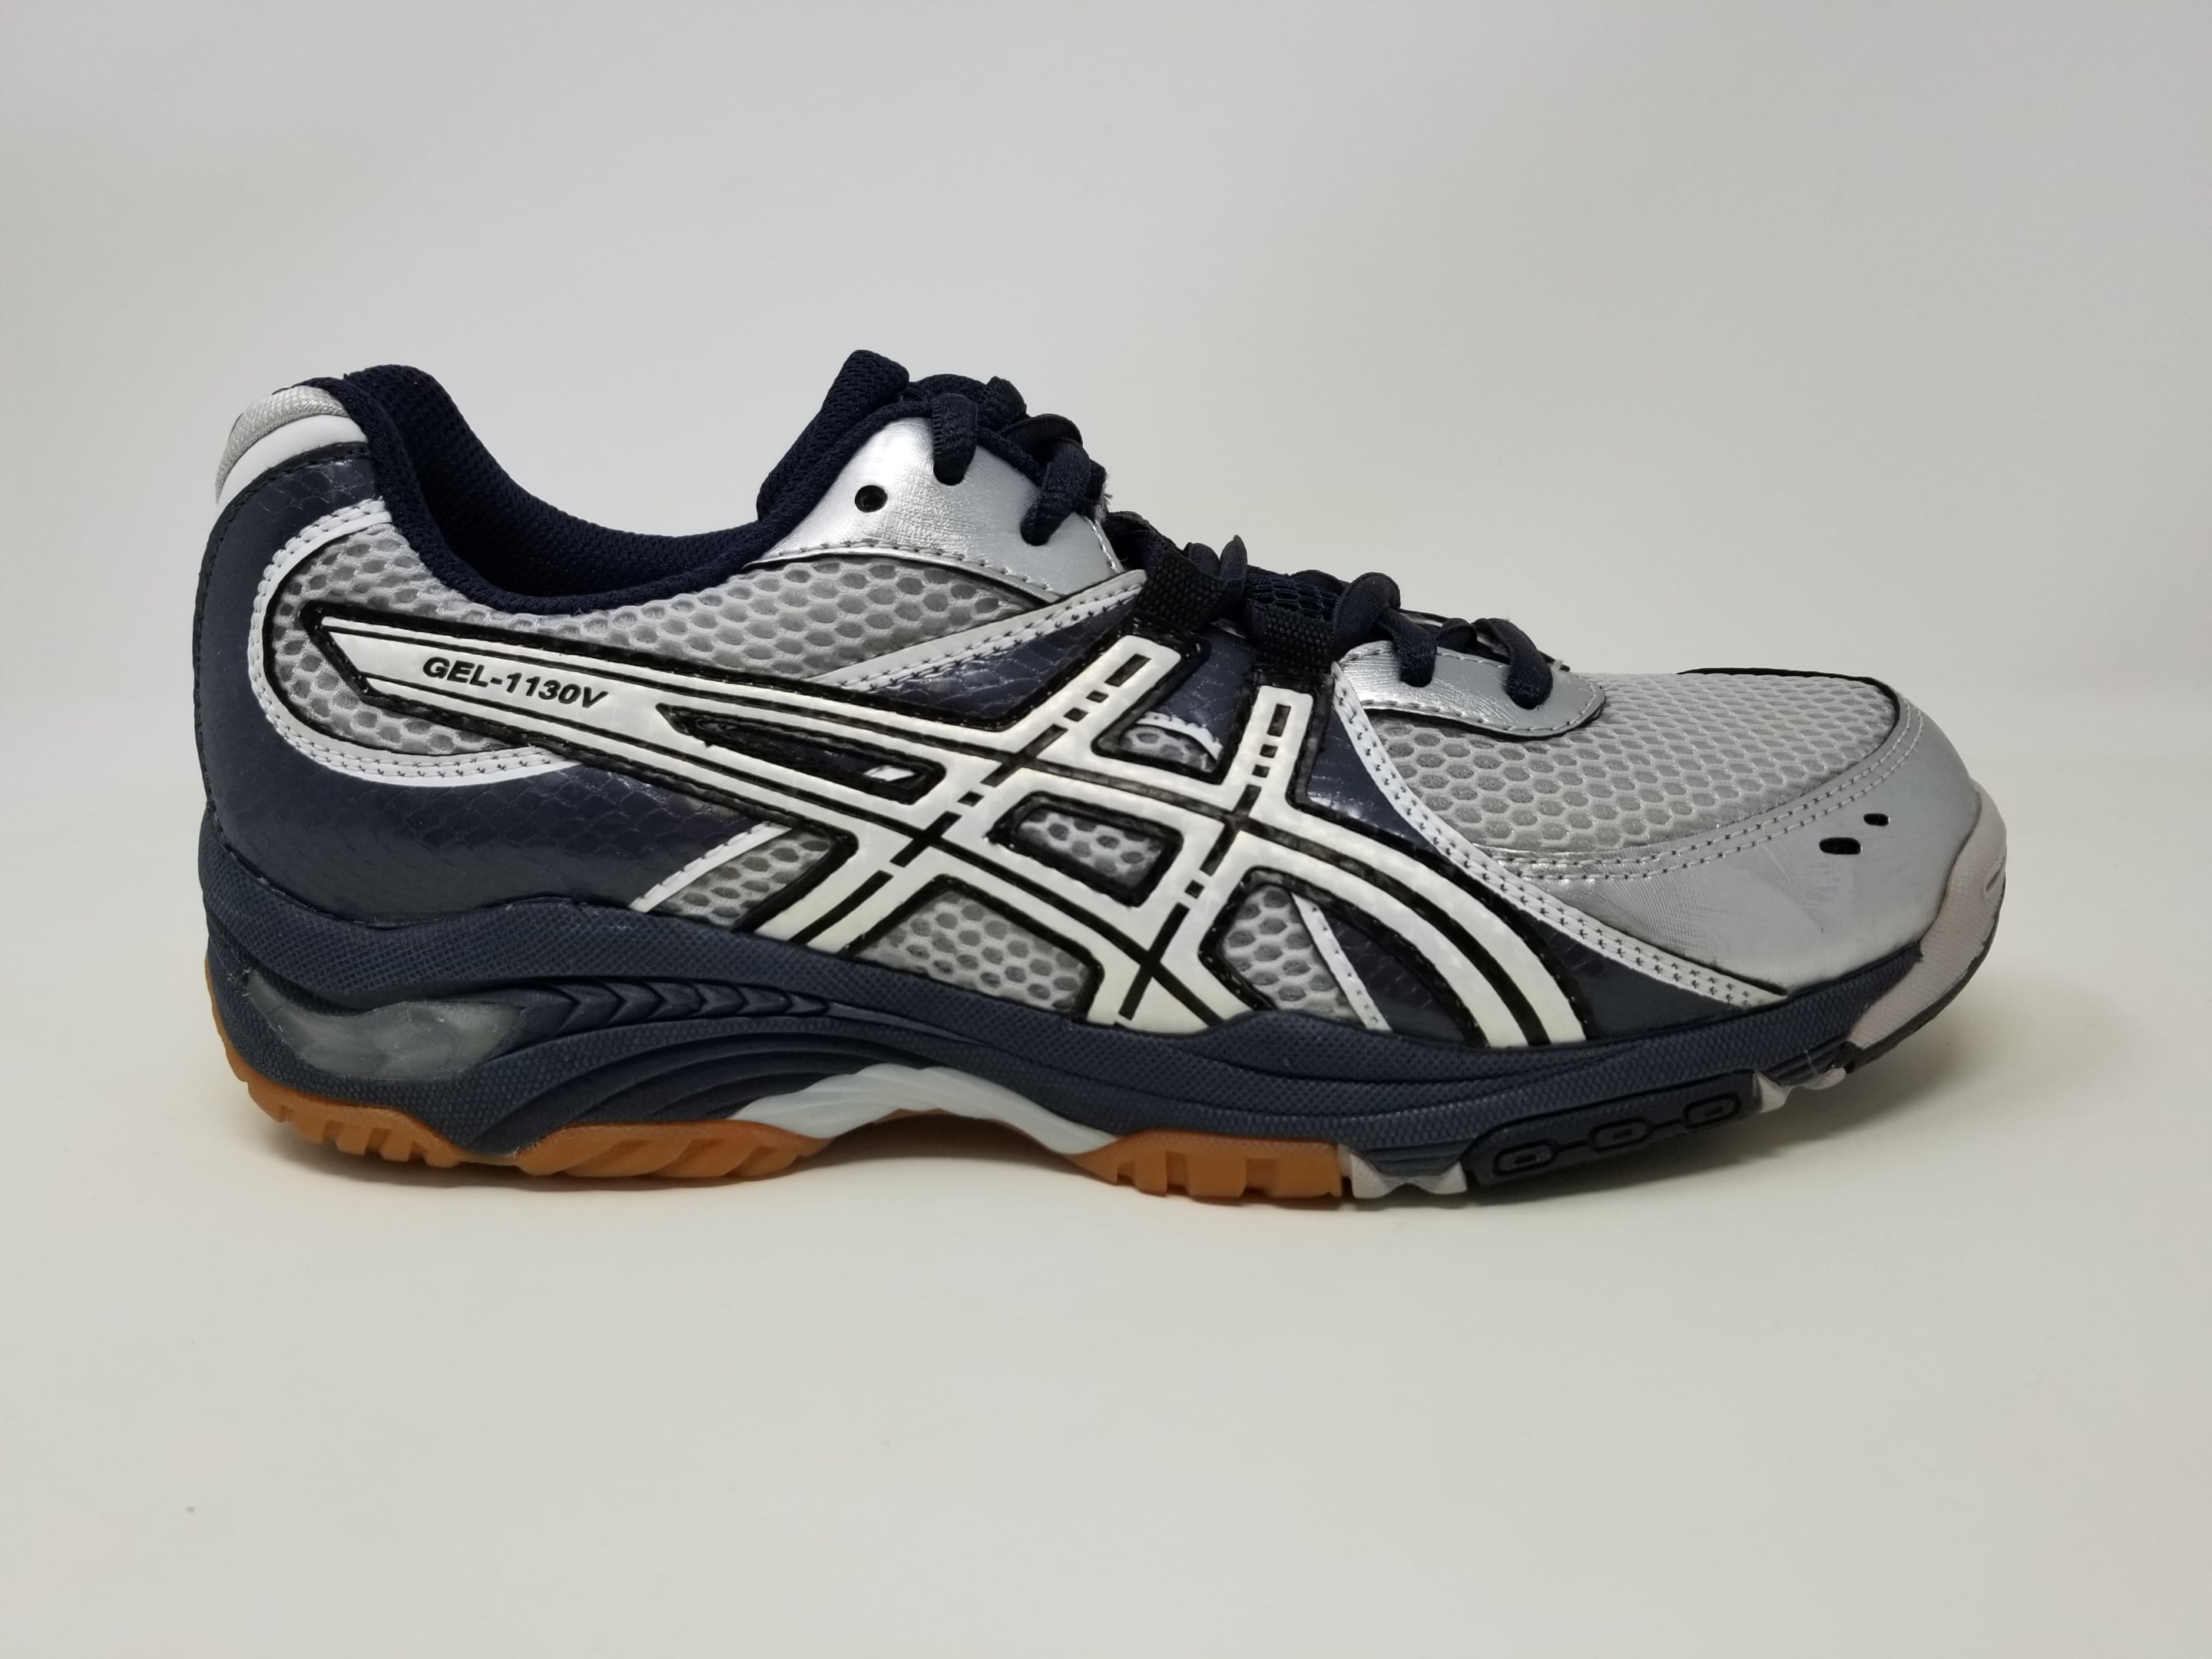 asics gel 1130v women's volleyball shoes